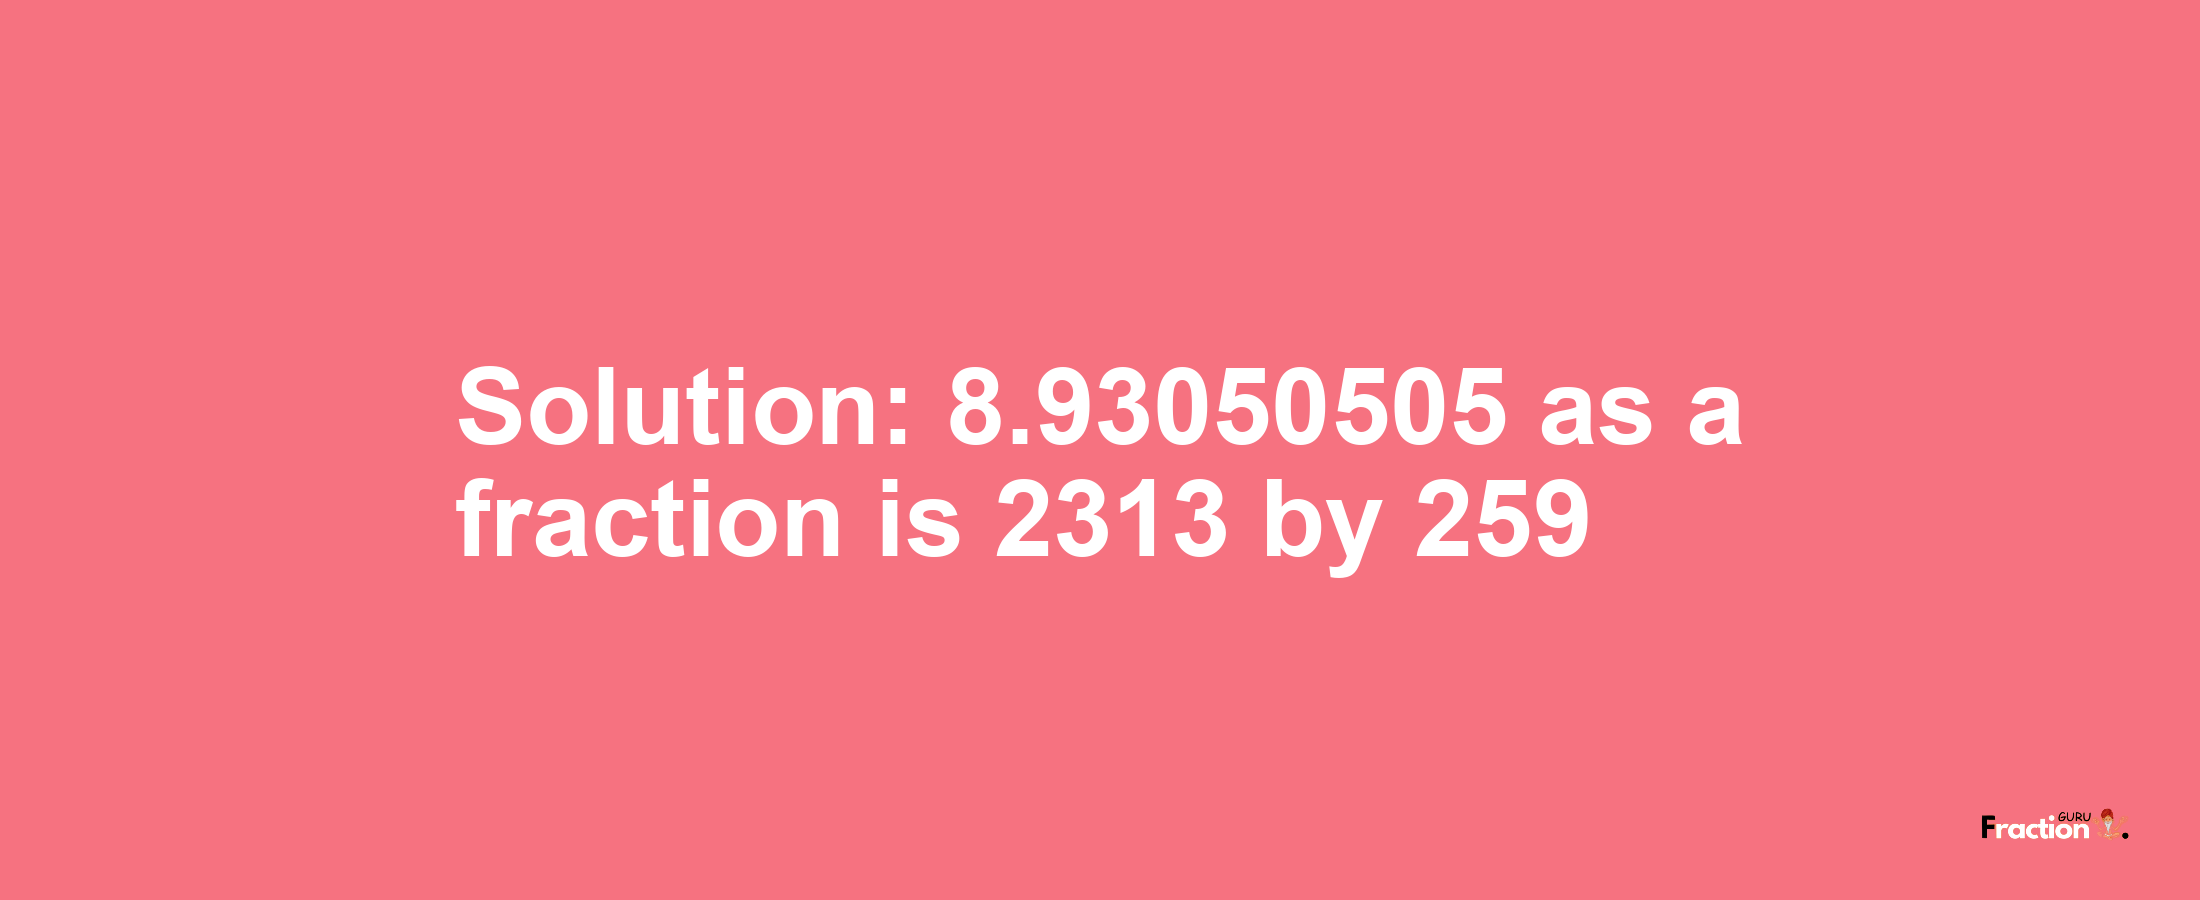 Solution:8.93050505 as a fraction is 2313/259